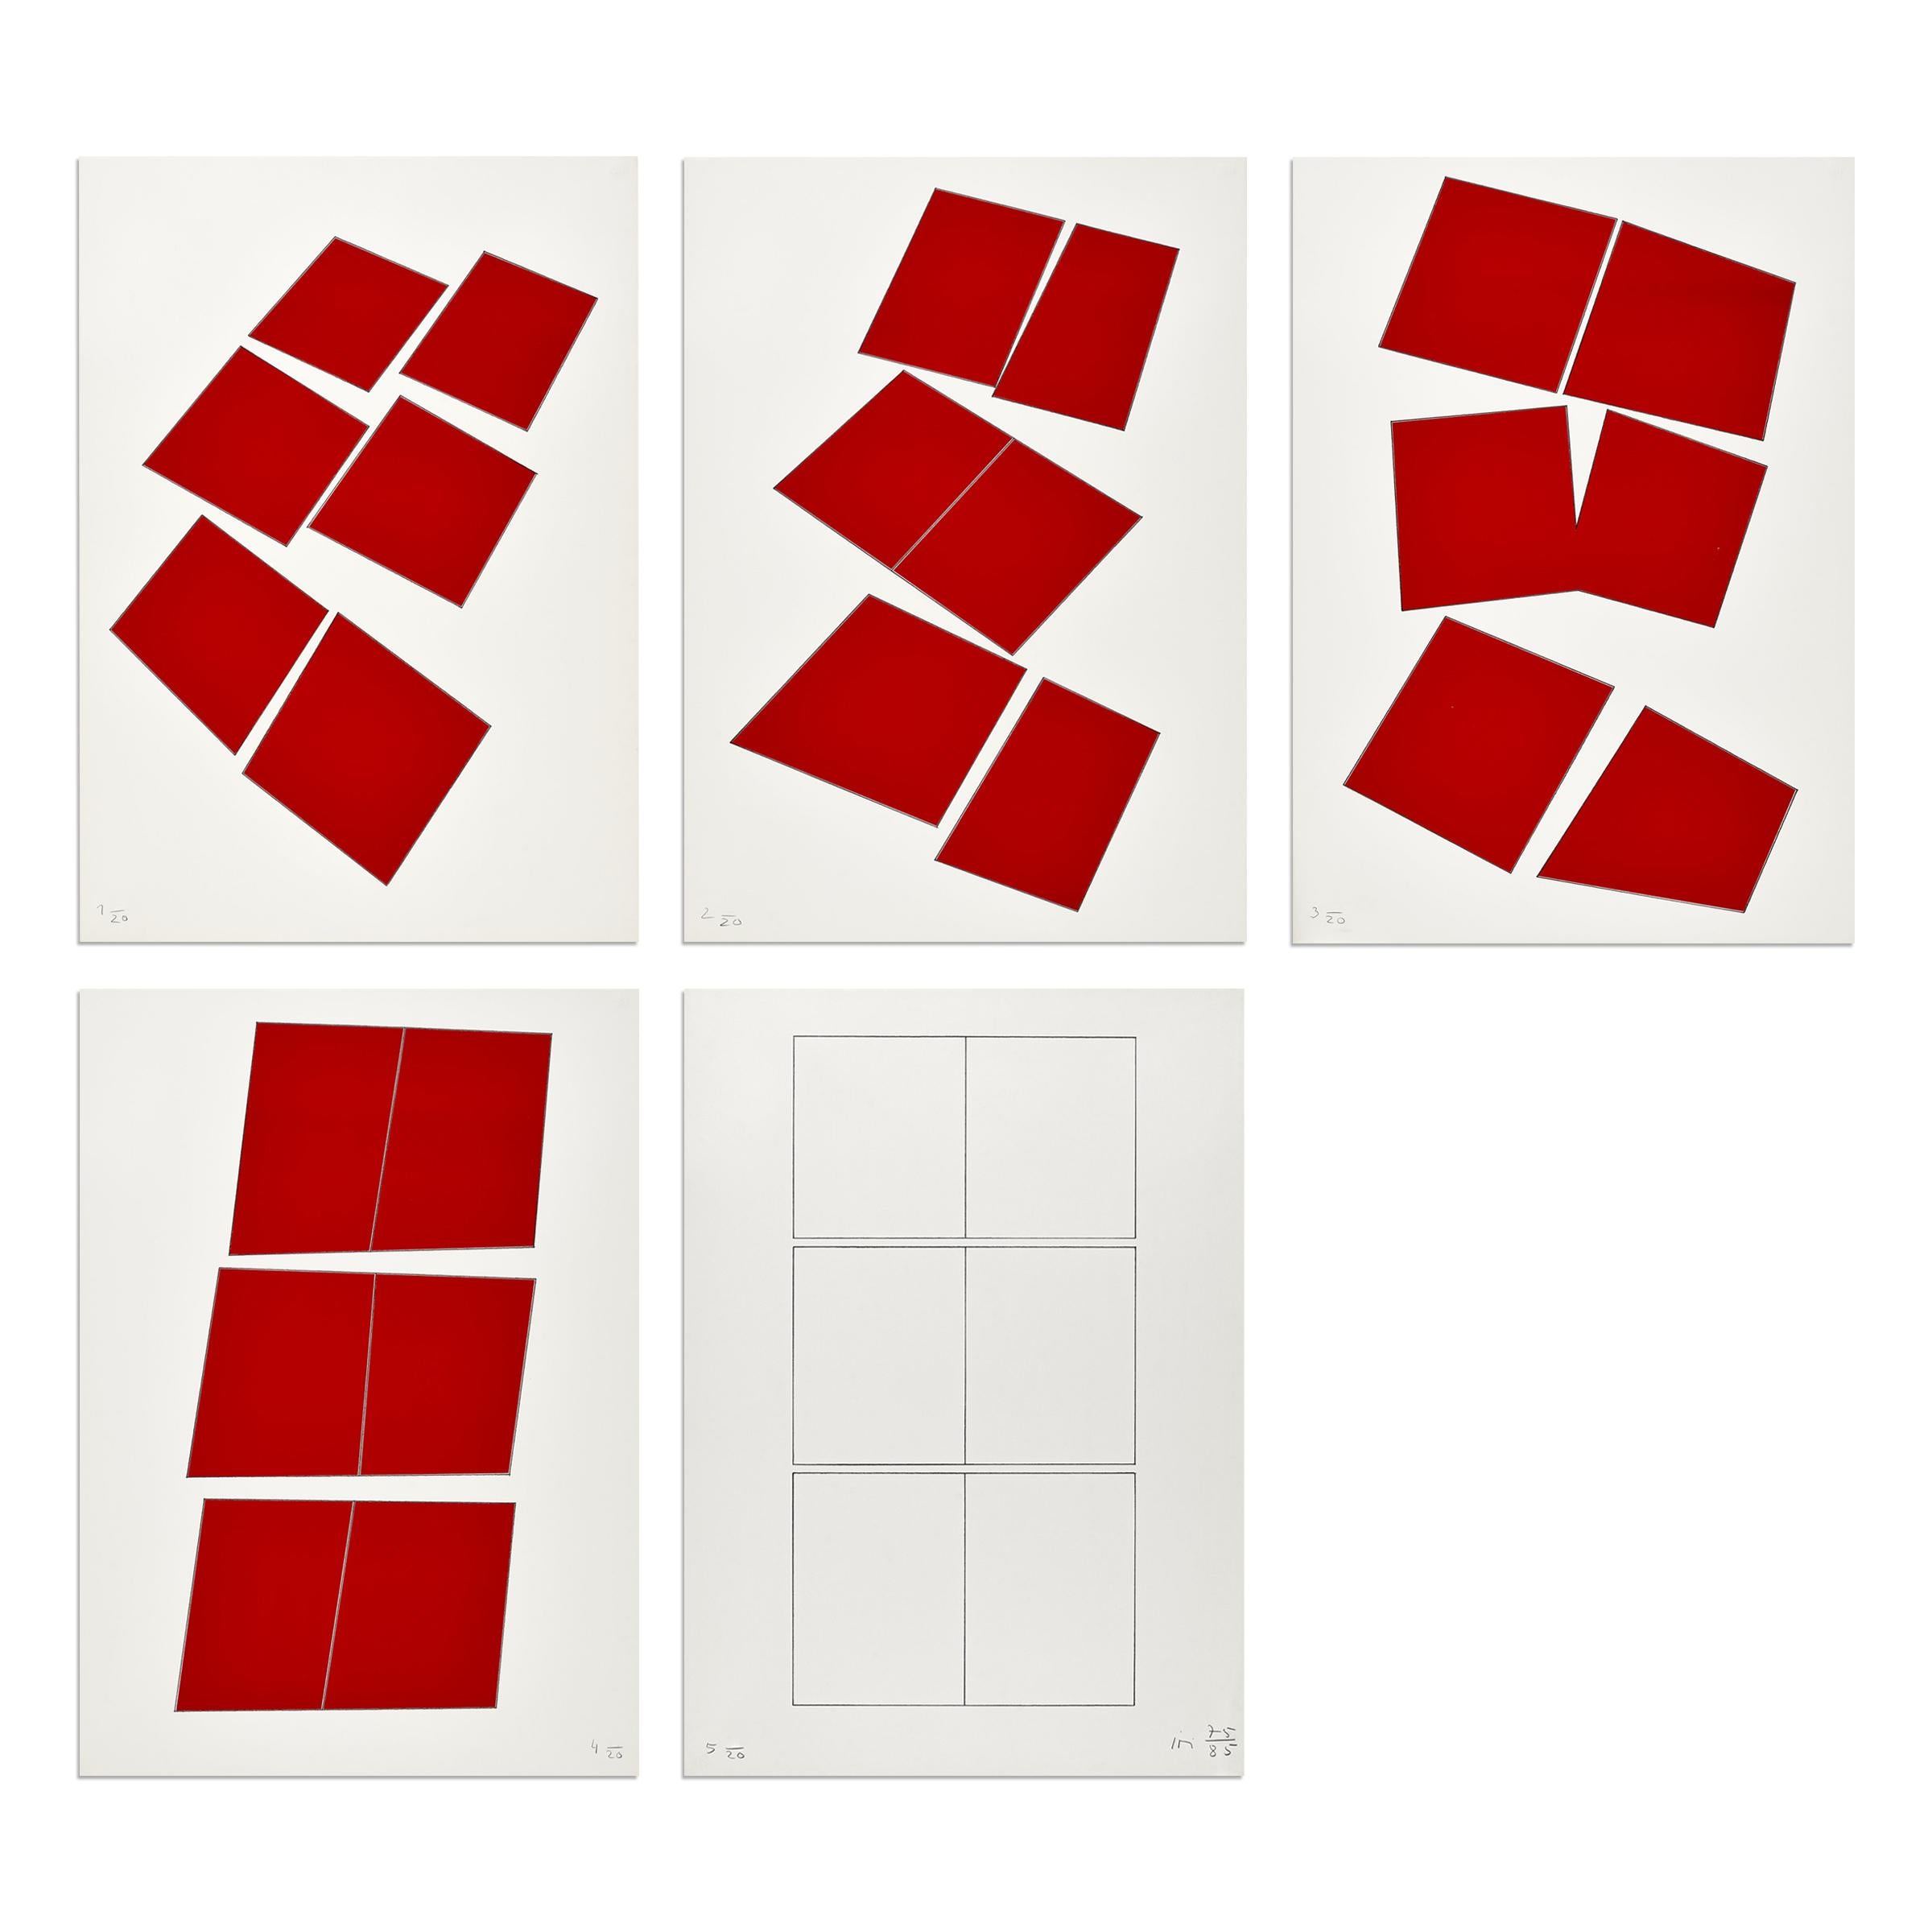 Imi Knoebel (German, born 1940)
Rote Konstellation, 1975/1985
Medium: Suite of 5 screenprints and pencil on wove paper
Dimensions: 102 x 73 cm (40.2 x 28.7 in)
Edition of 20: Each hand-signed and numbered in pencil
Condition: Very good, with traces